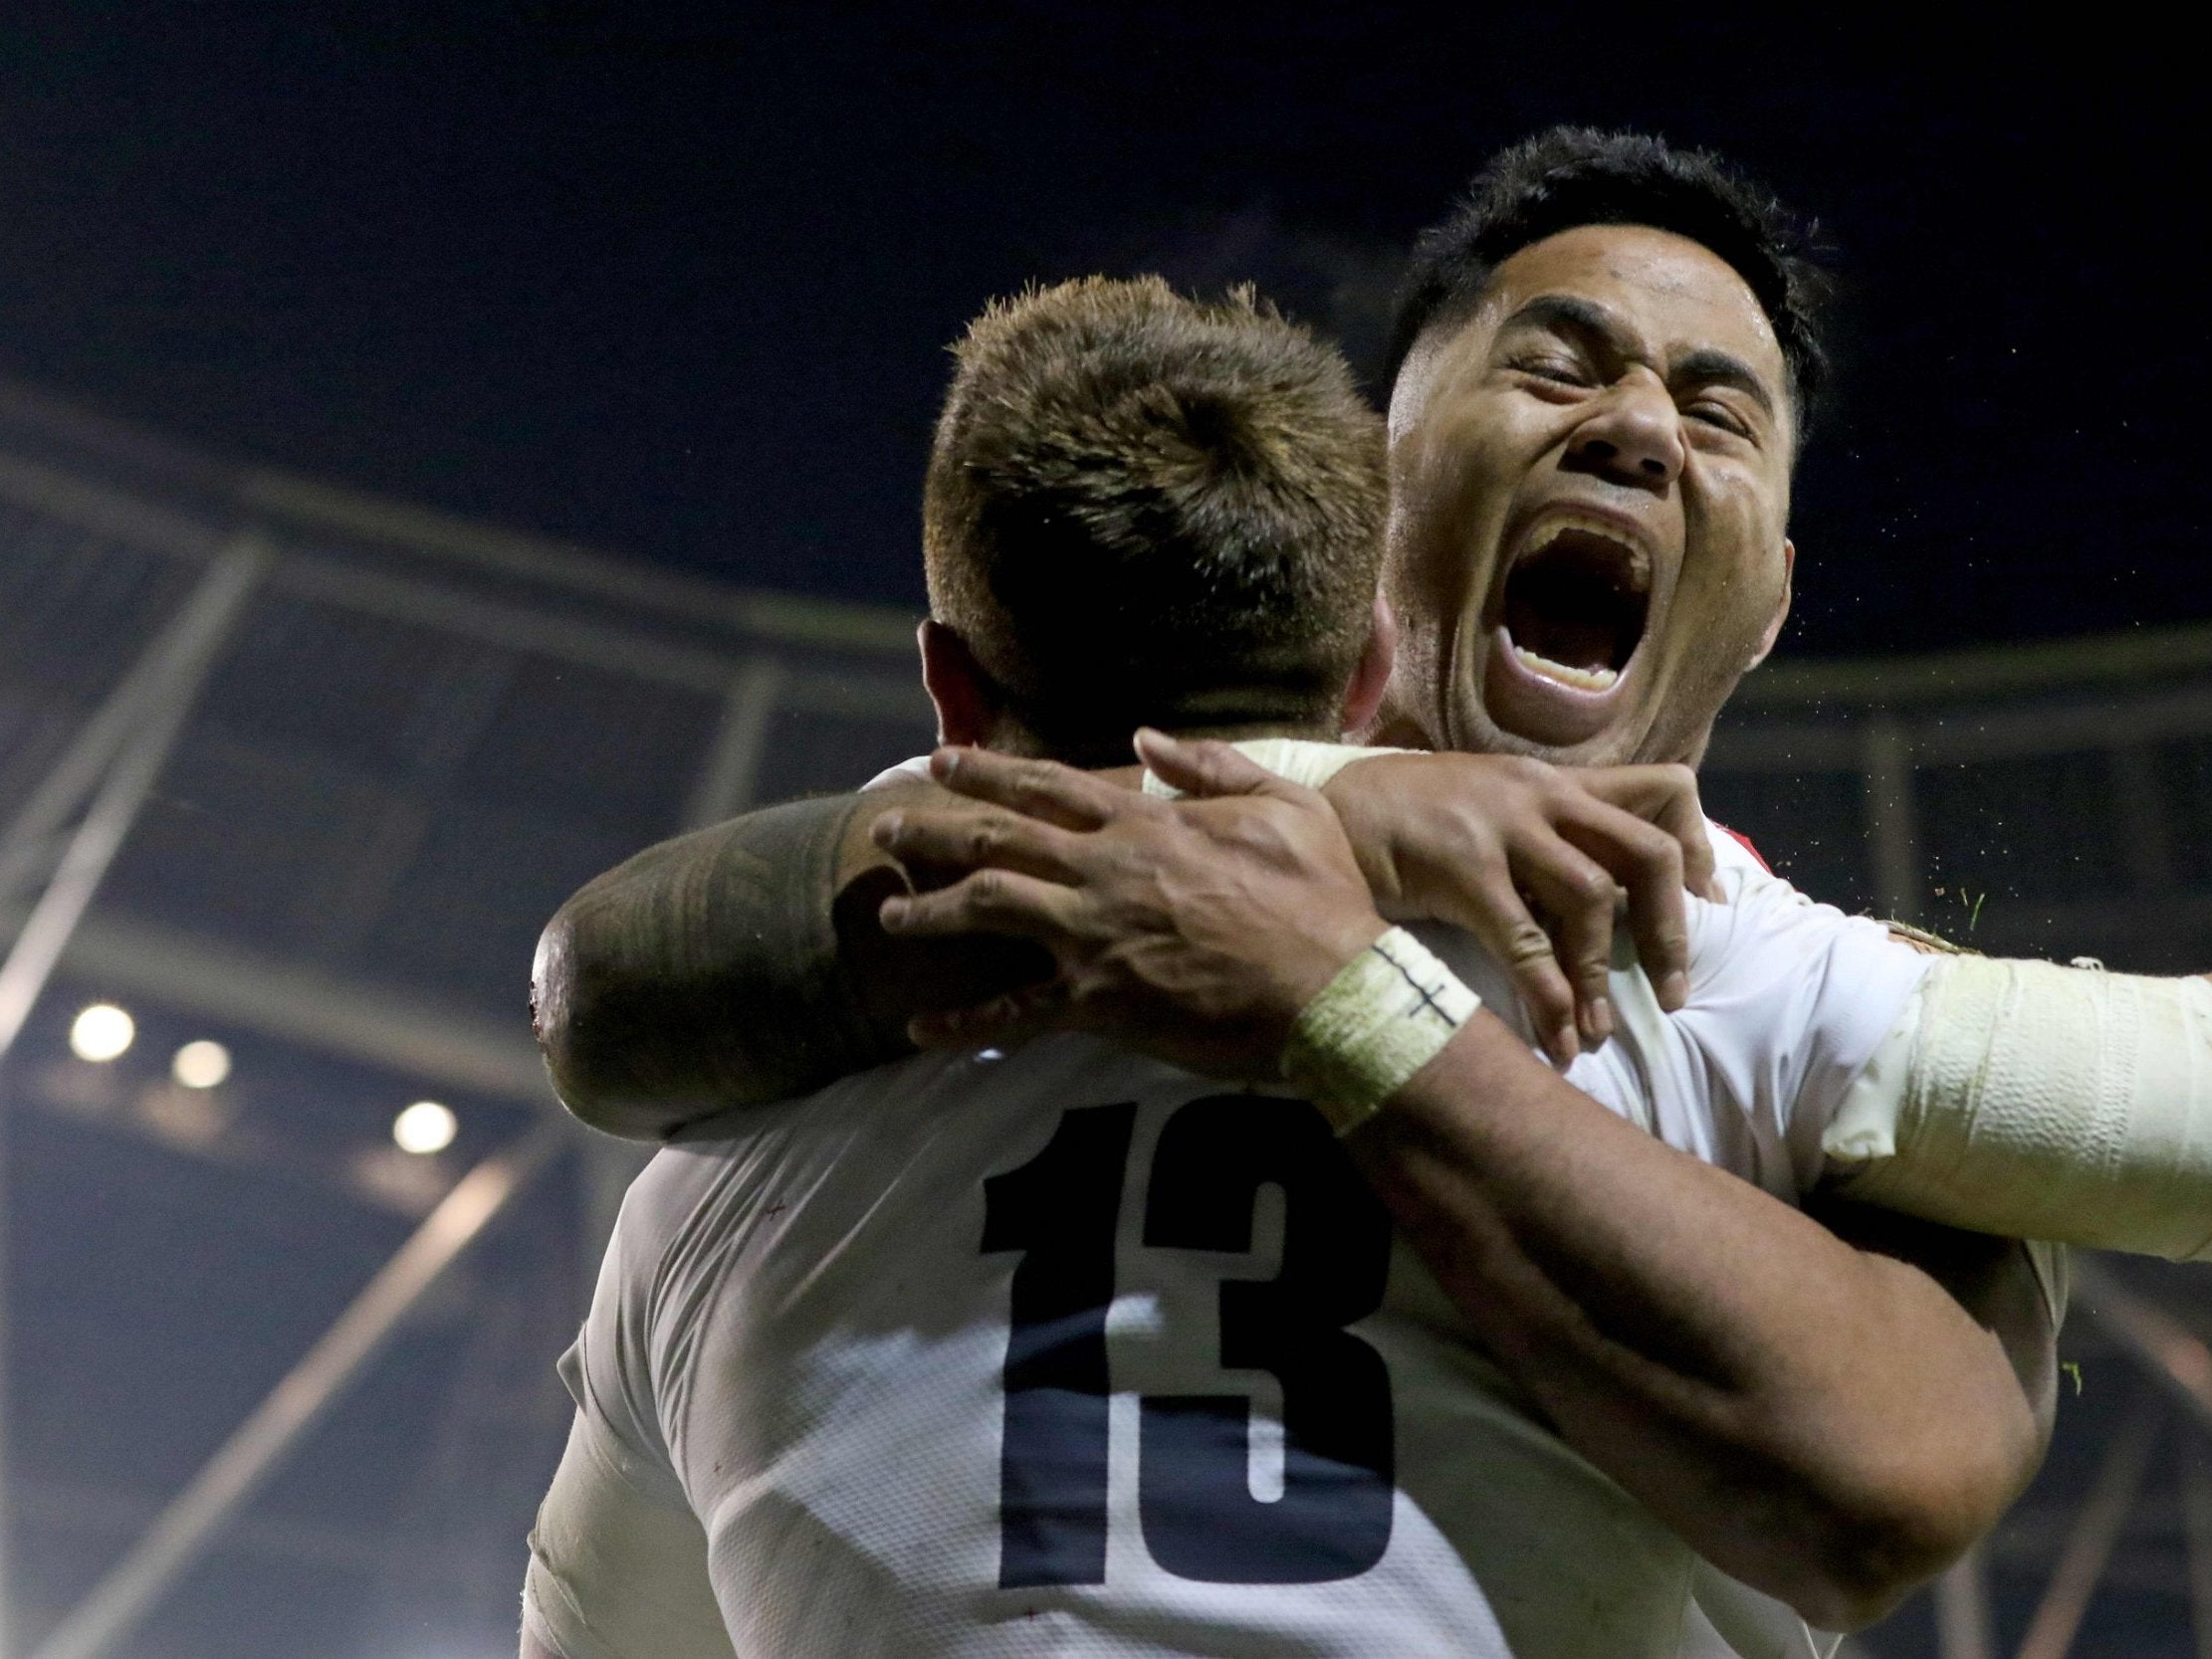 England secured all five possible points at the Aviva (AFP/Getty)